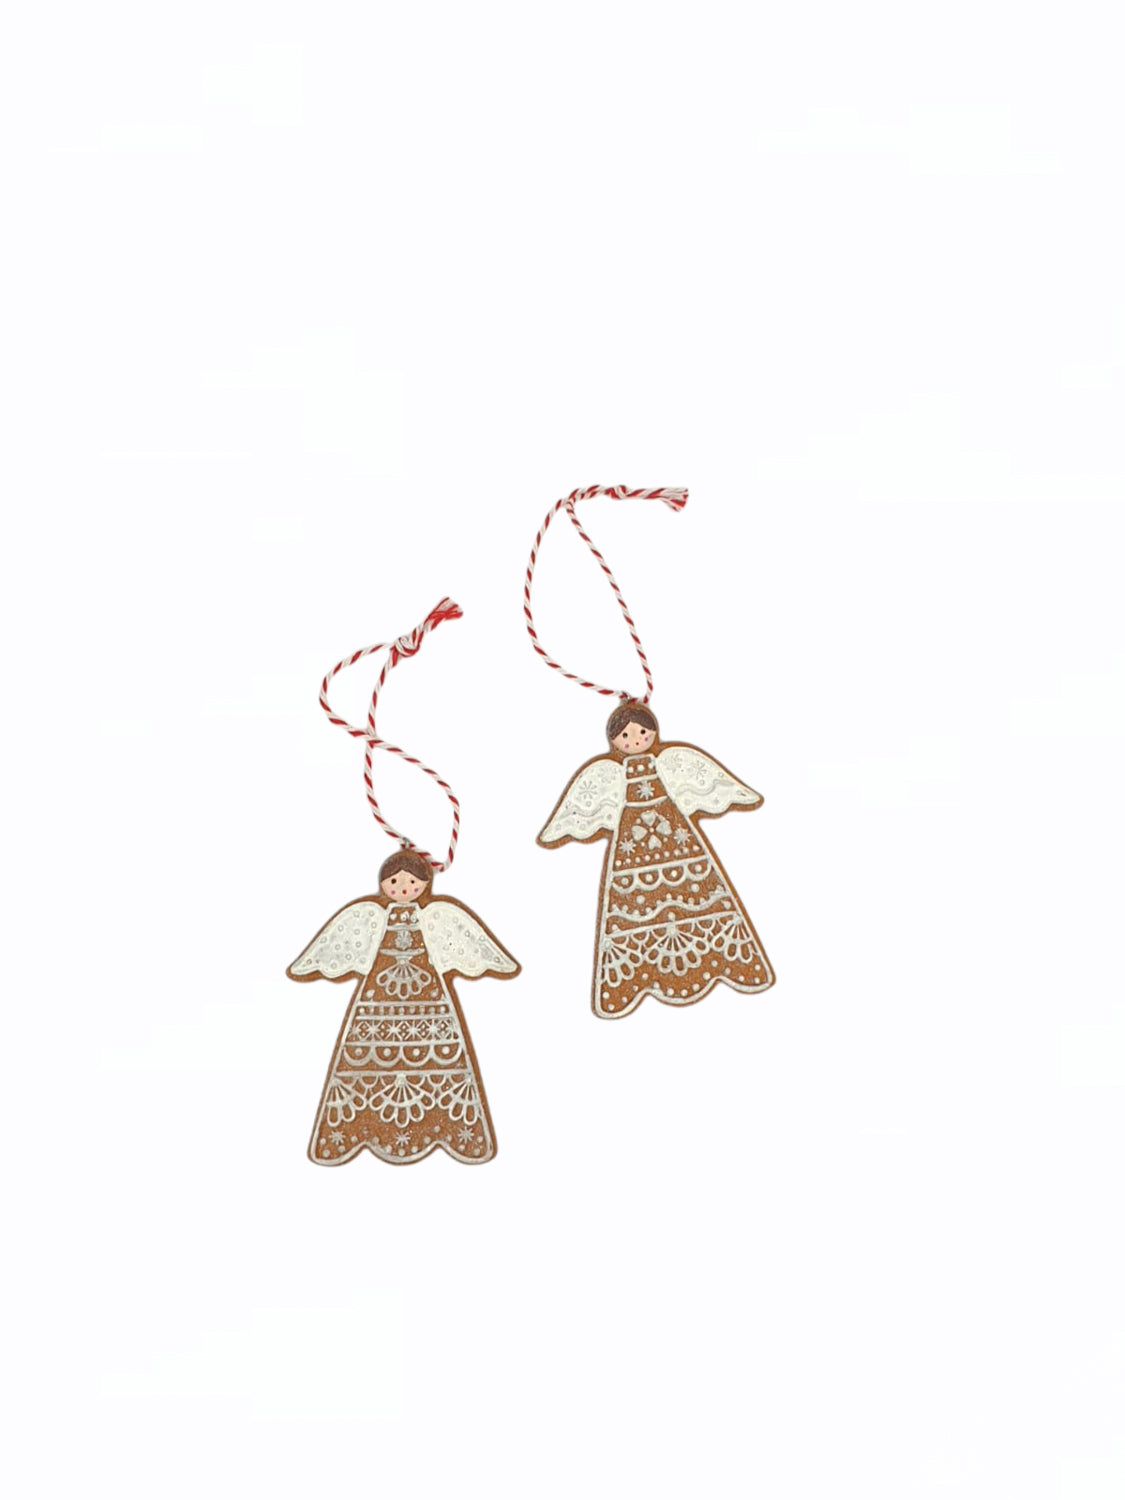 Gingerbread Style Lace Angel -  Christmas Ornament